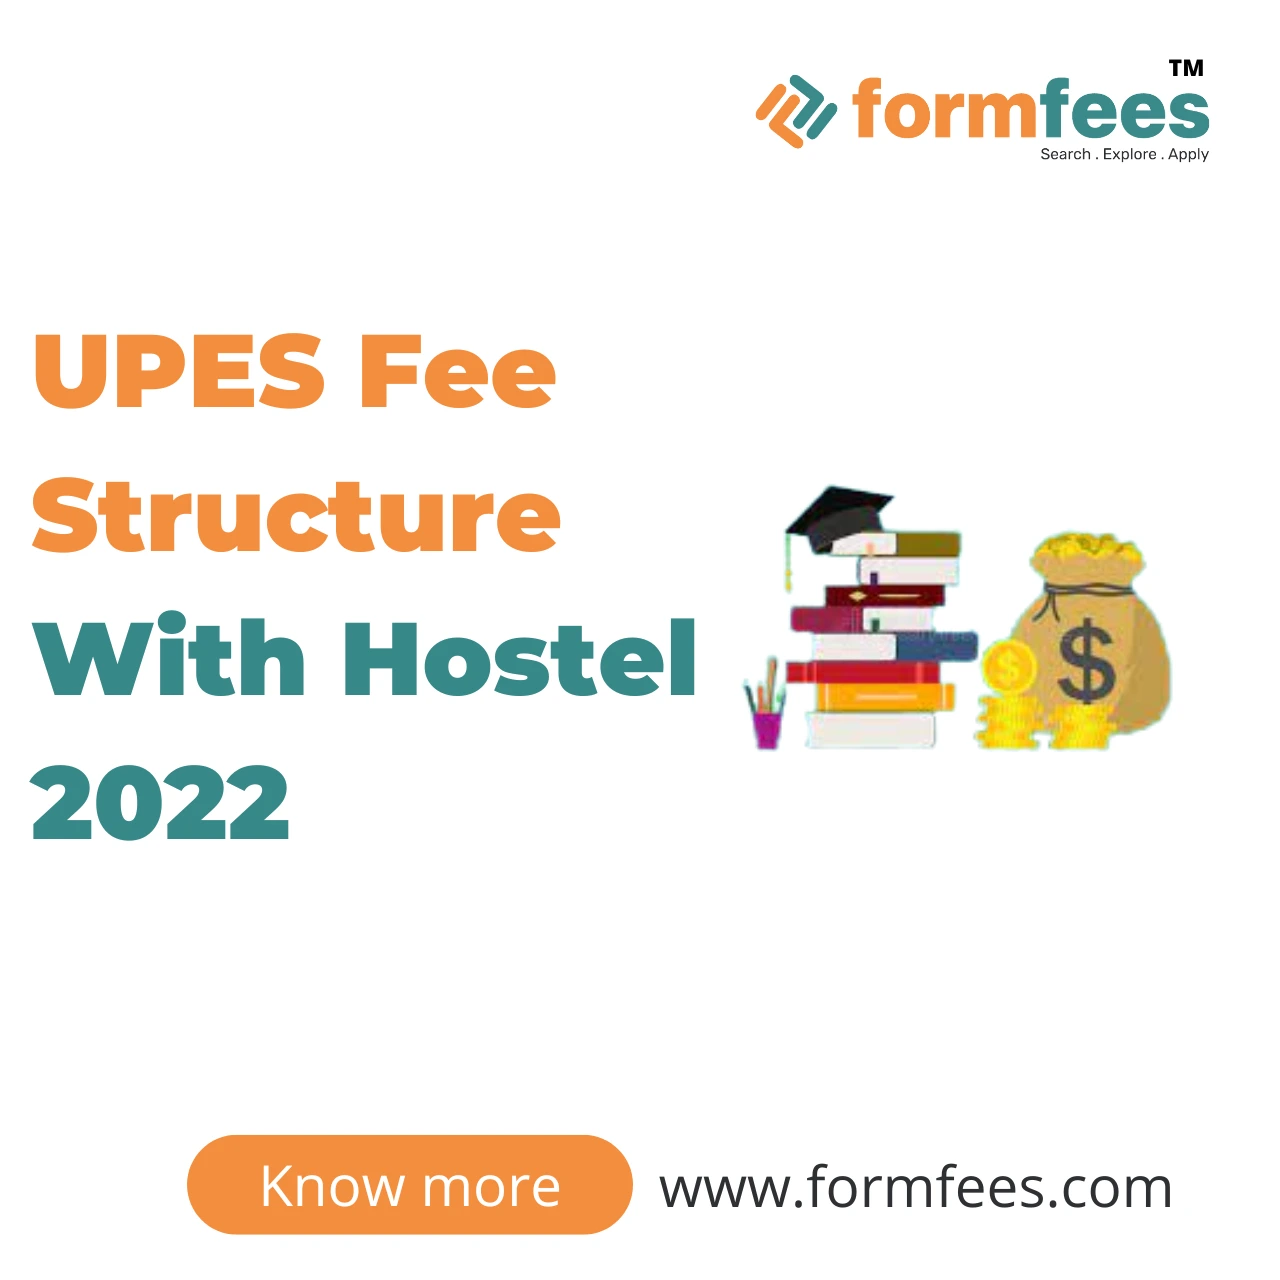 UPES Fee Structure With Hostel 2022